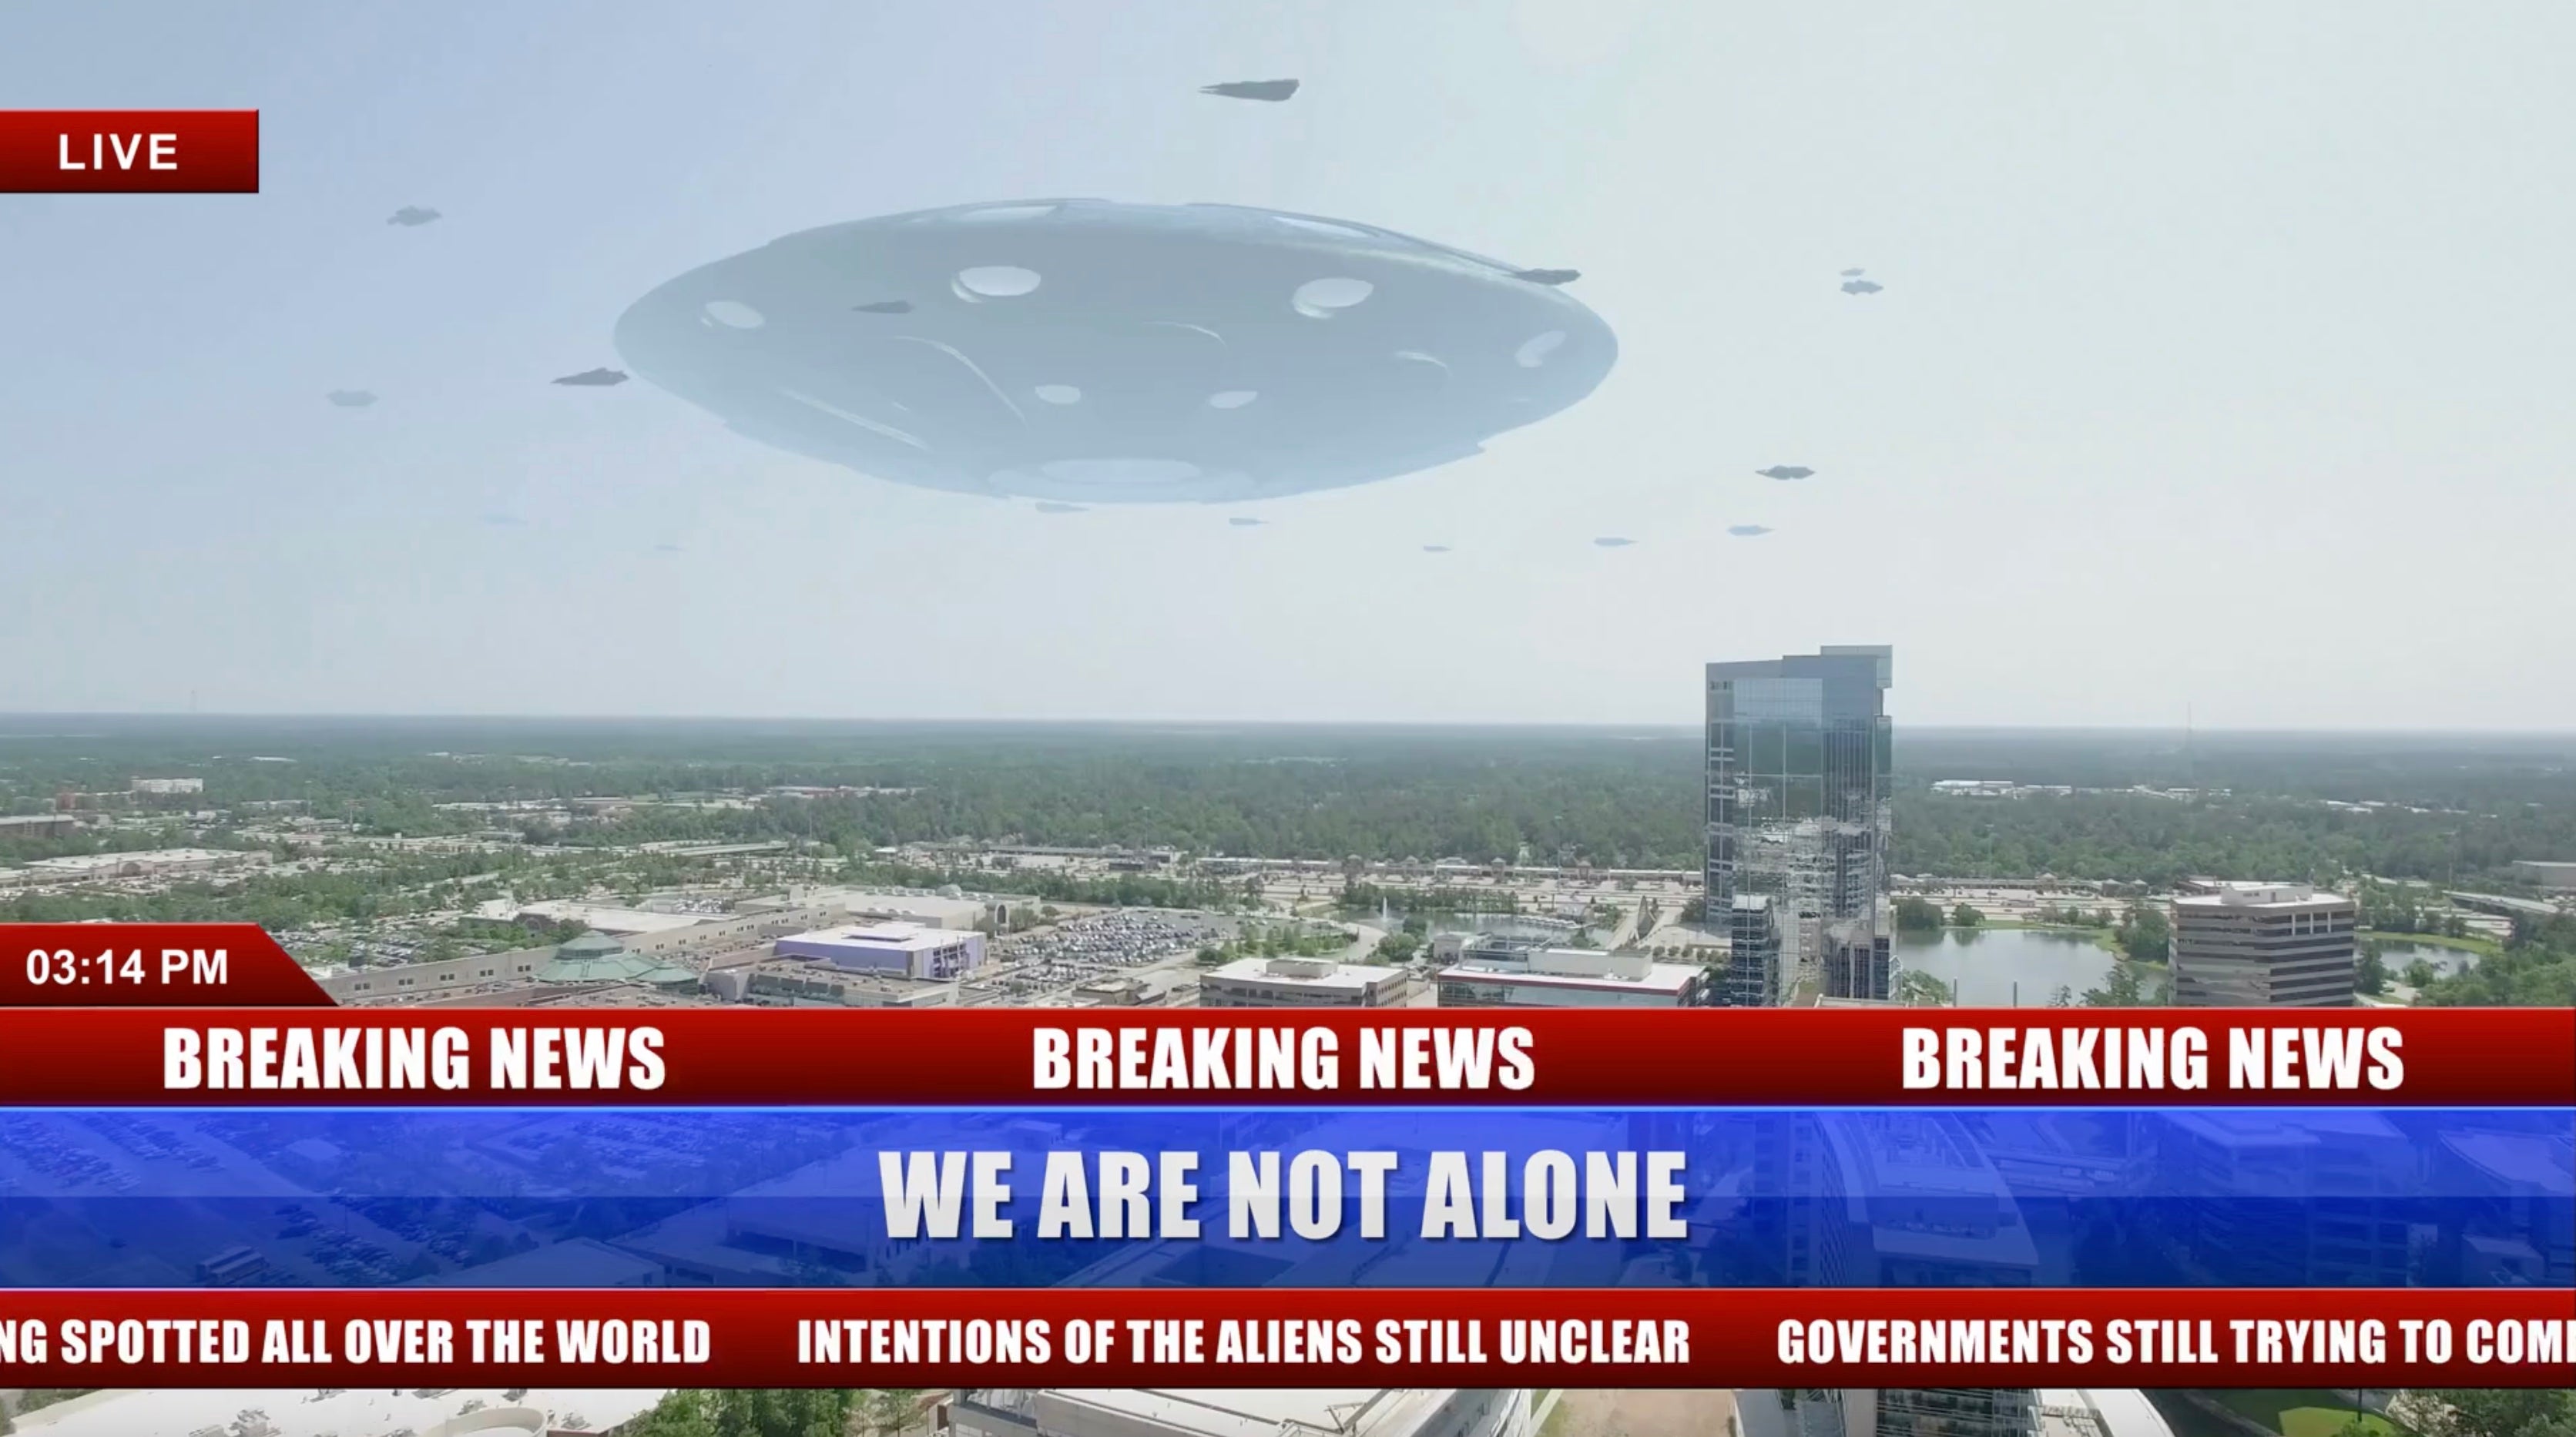 Preparing for Disclosure: Embracing the Arrival of Extraterrestrial Neighbors!